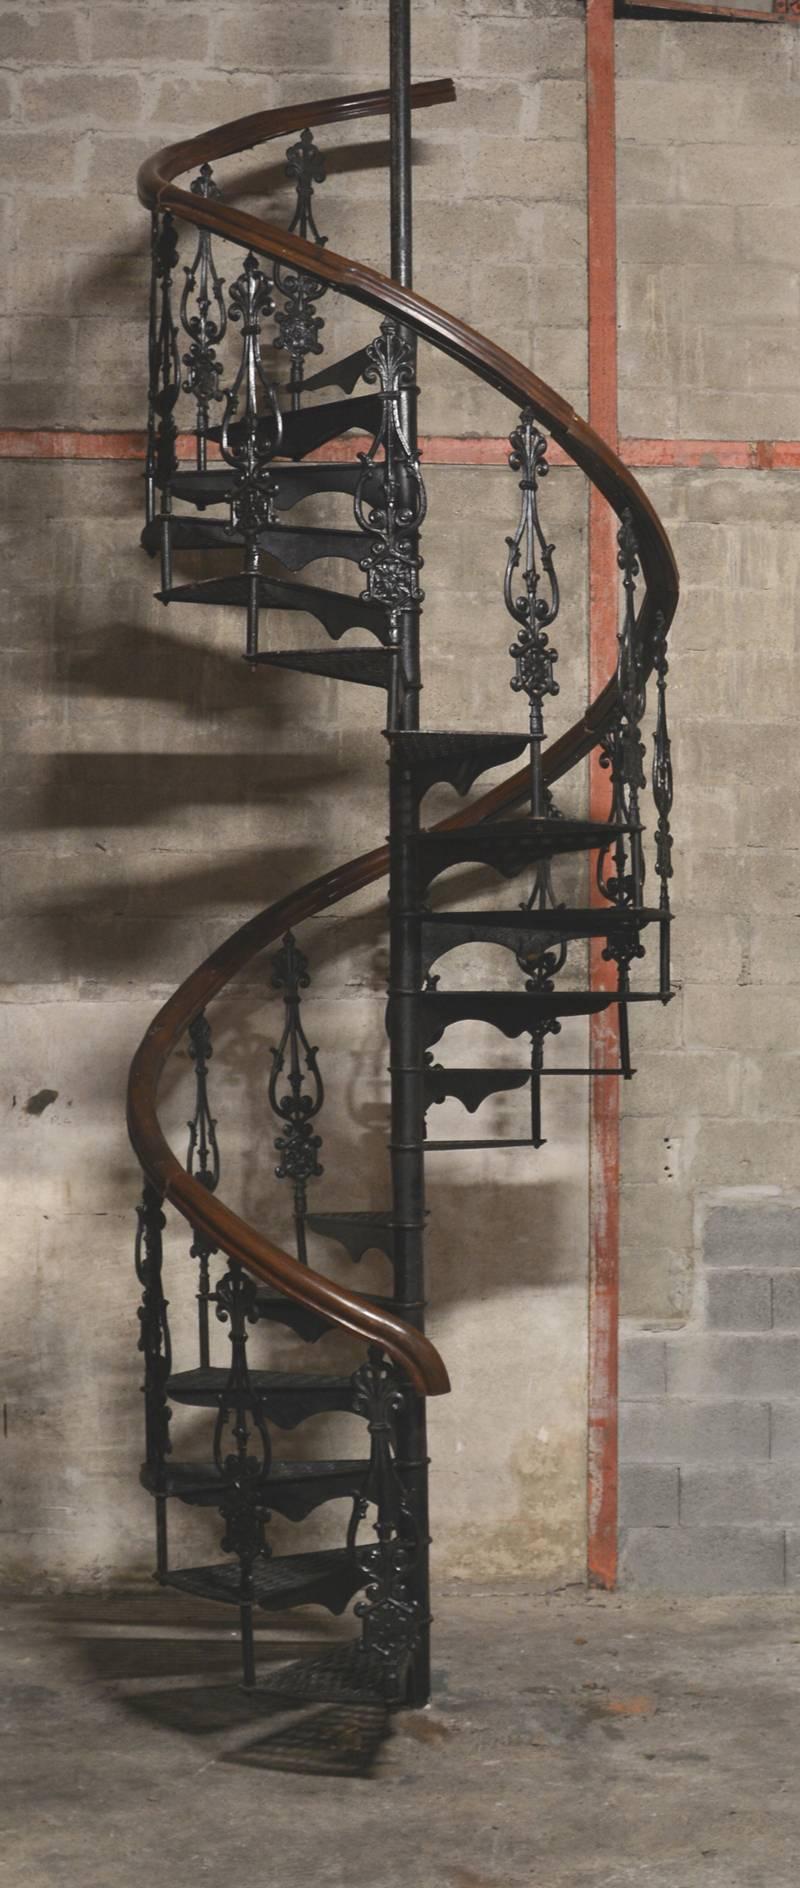 Late 19th century Colonial Spiral staircase in cast iron. These old English Victorian Staircases are refurbished (see photos before restoration), in good condition and easy to assemble. Adjustable size up to 138” / 3.50 m (we can propose staircases